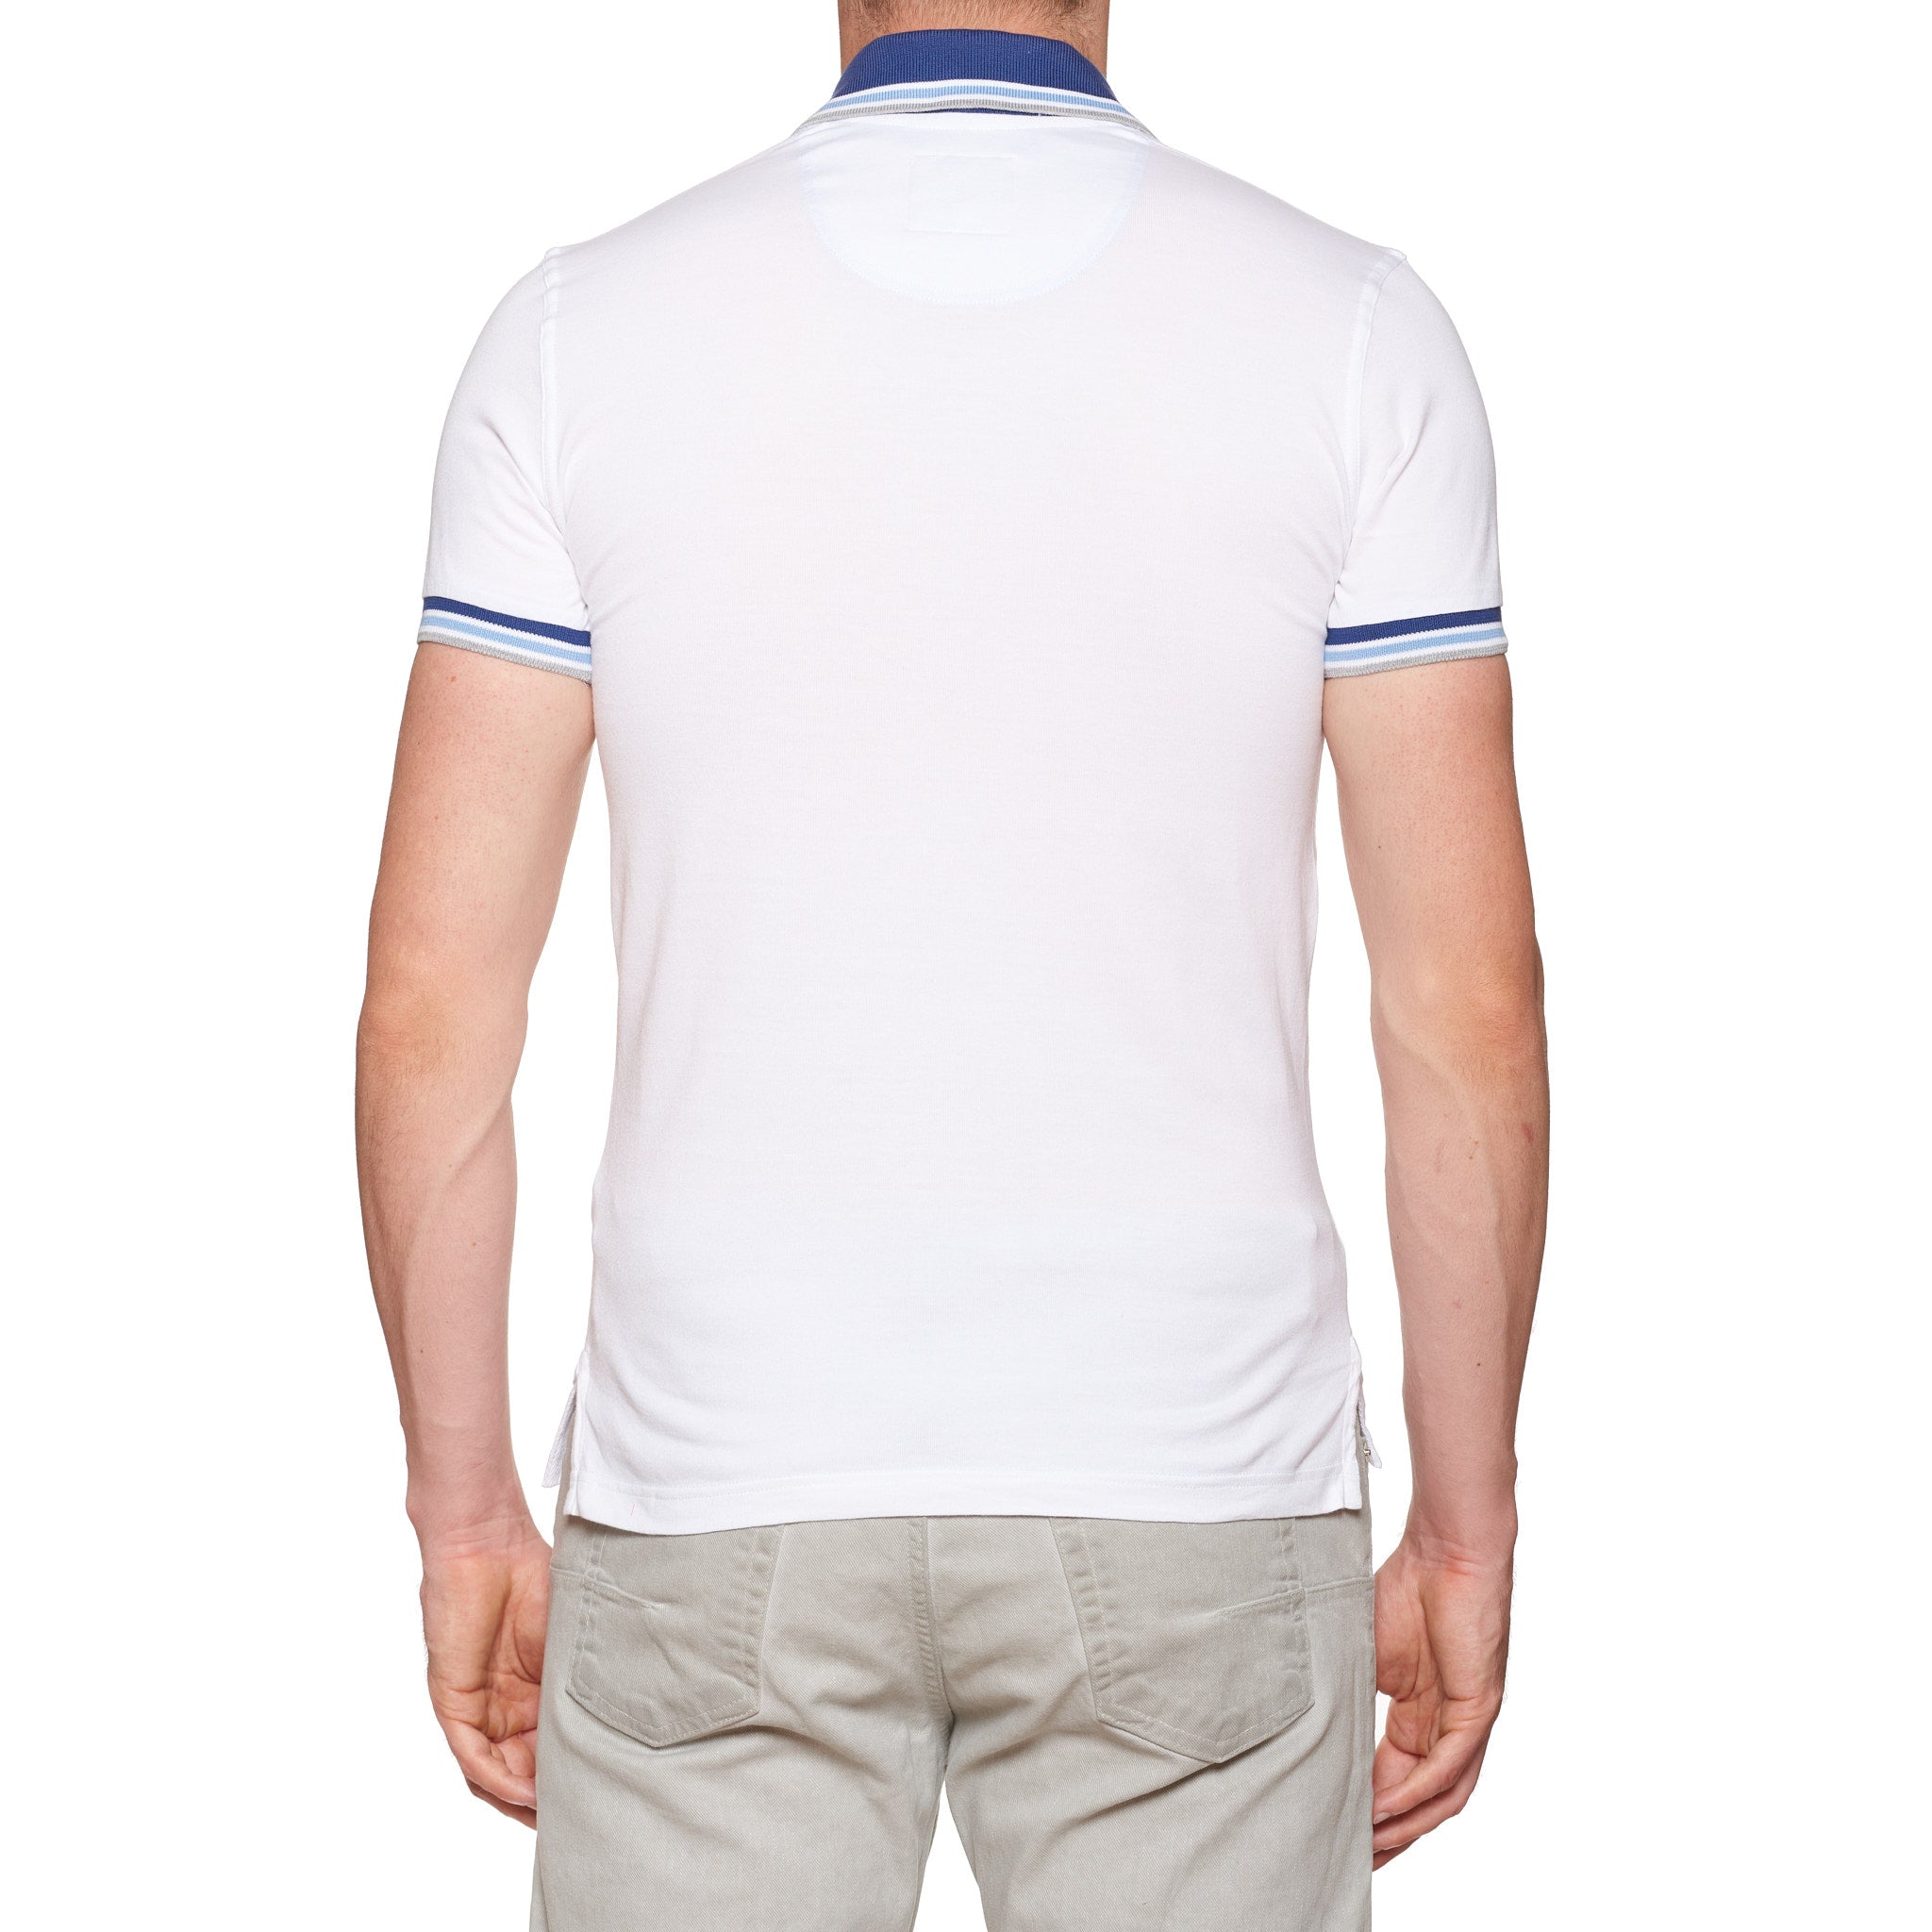 FEDELI White Cotton Jersey Frosted Short Sleeve Polo Shirt 46 NEW XS Slim FEDELI